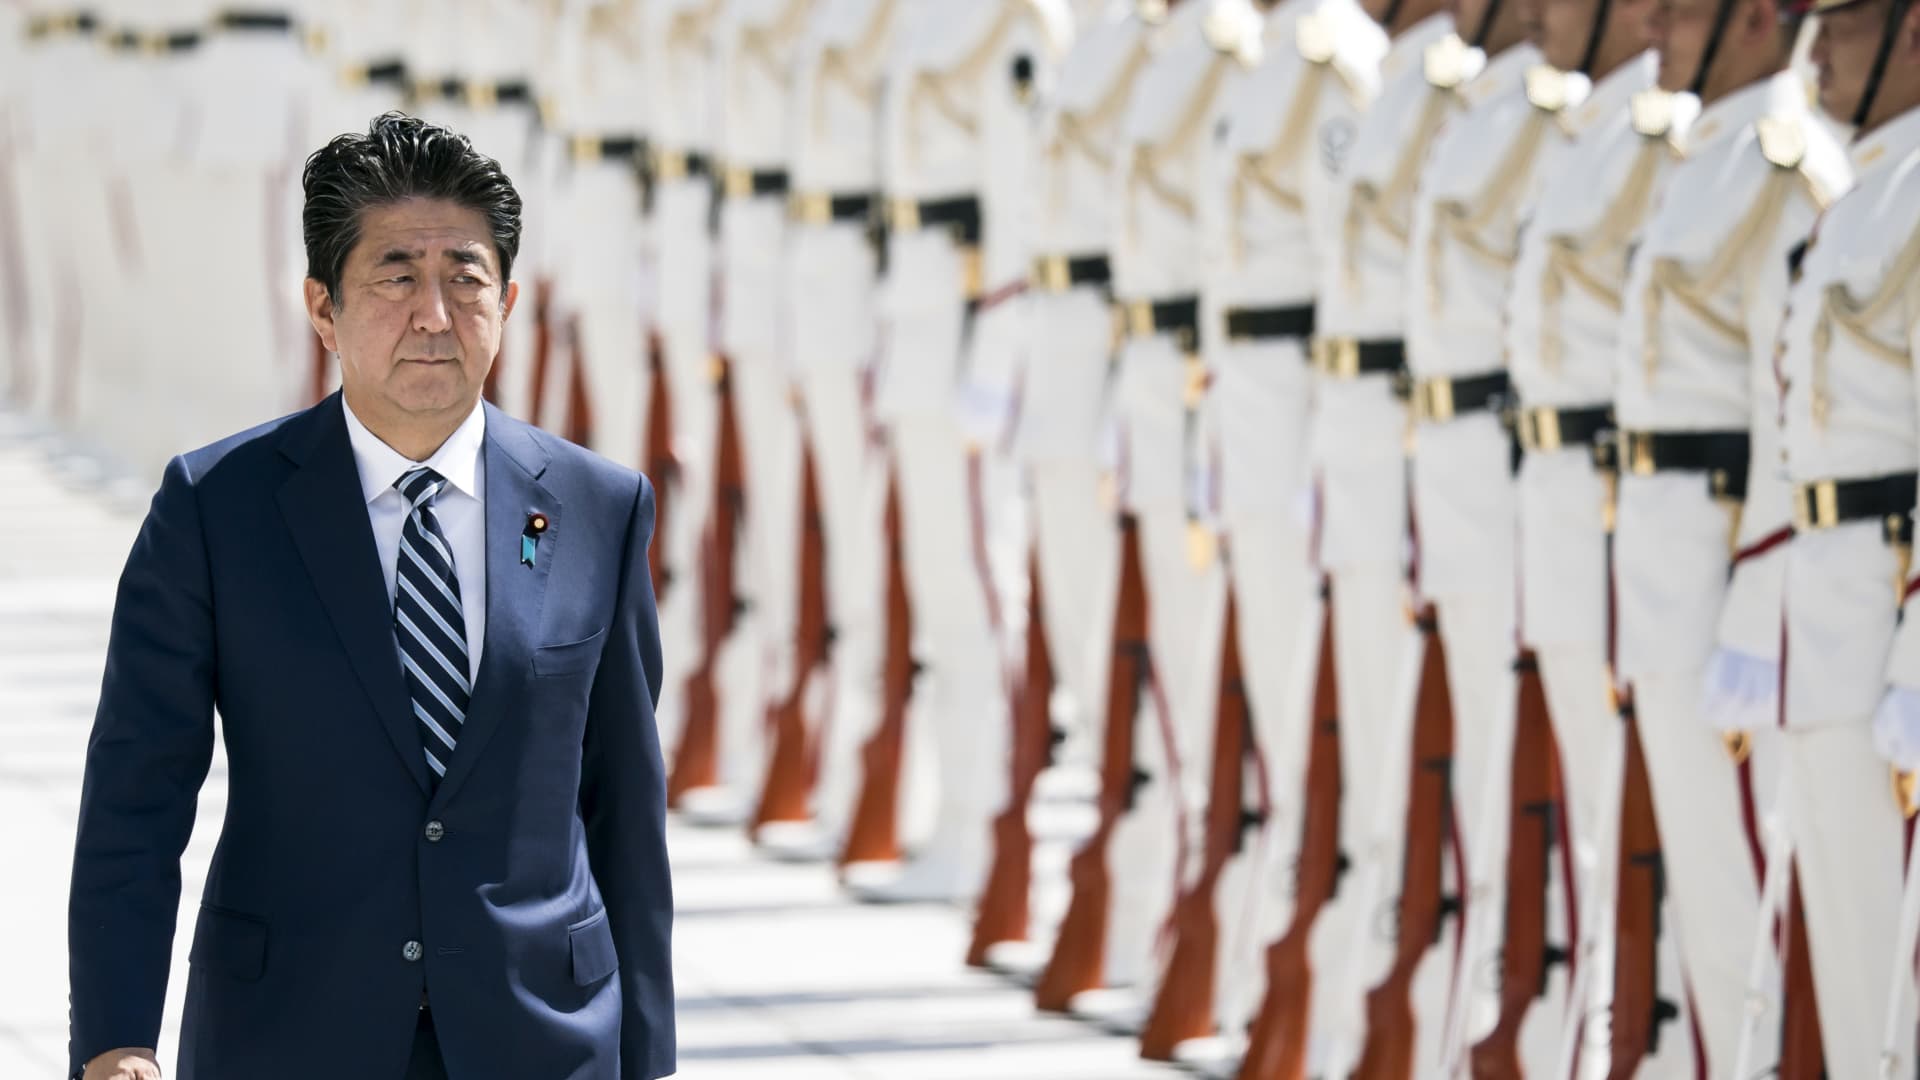 Japan's Prime Minister Shinzo Abe inspects an honor guard ahead of a Self Defense Forces senior officers' meeting at the Ministry of Defense on Sep. 17, 2019 in Tokyo, Japan.